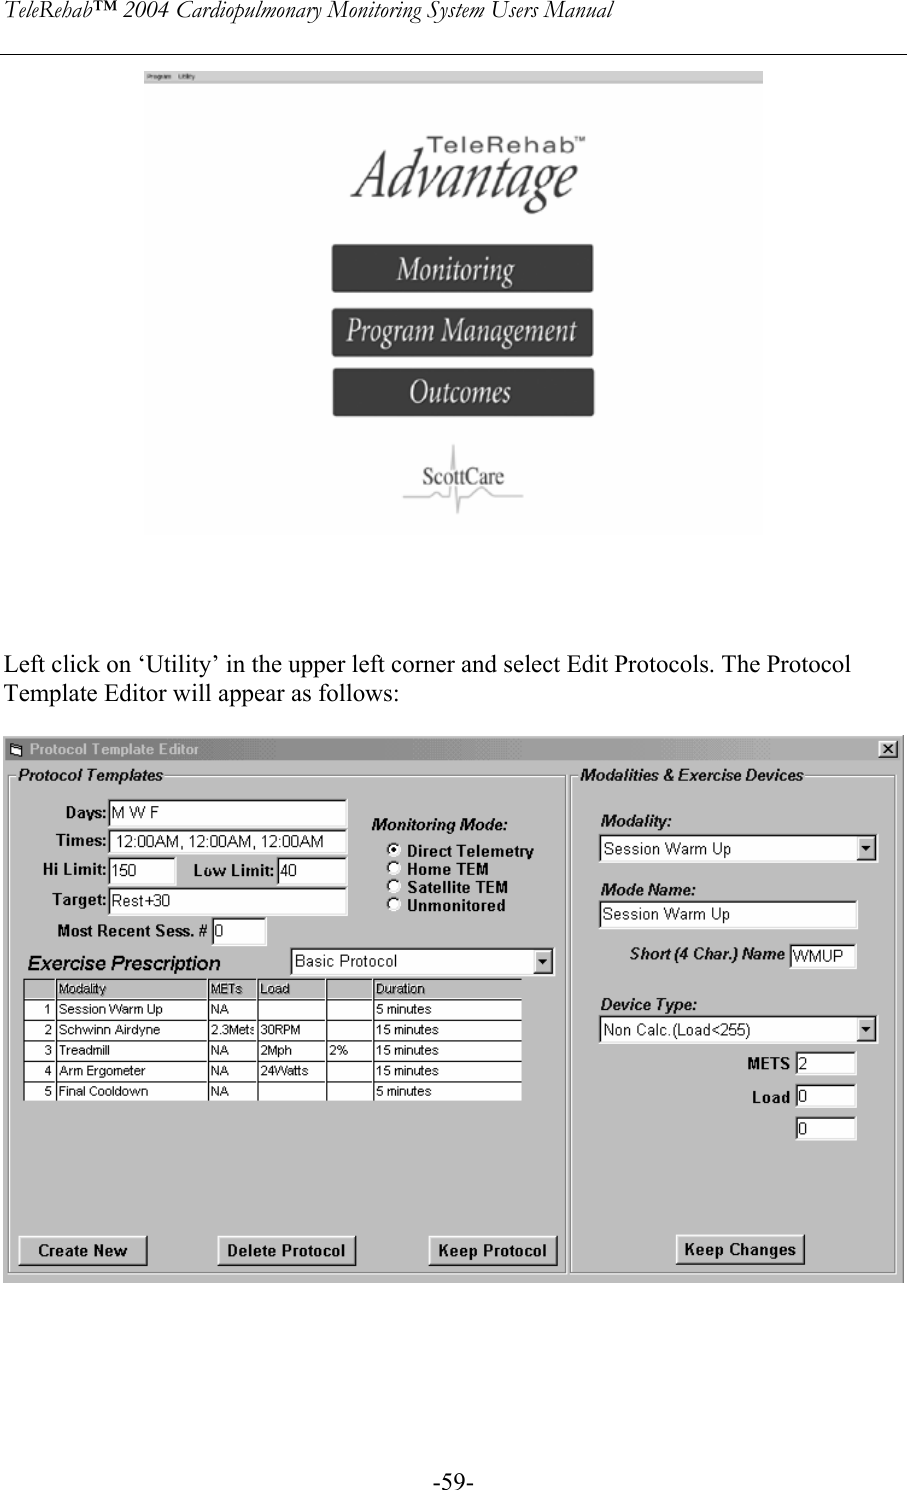 TeleRehab™ 2004 Cardiopulmonary Monitoring System Users Manual    -59-     Left click on ‘Utility’ in the upper left corner and select Edit Protocols. The Protocol Template Editor will appear as follows:      